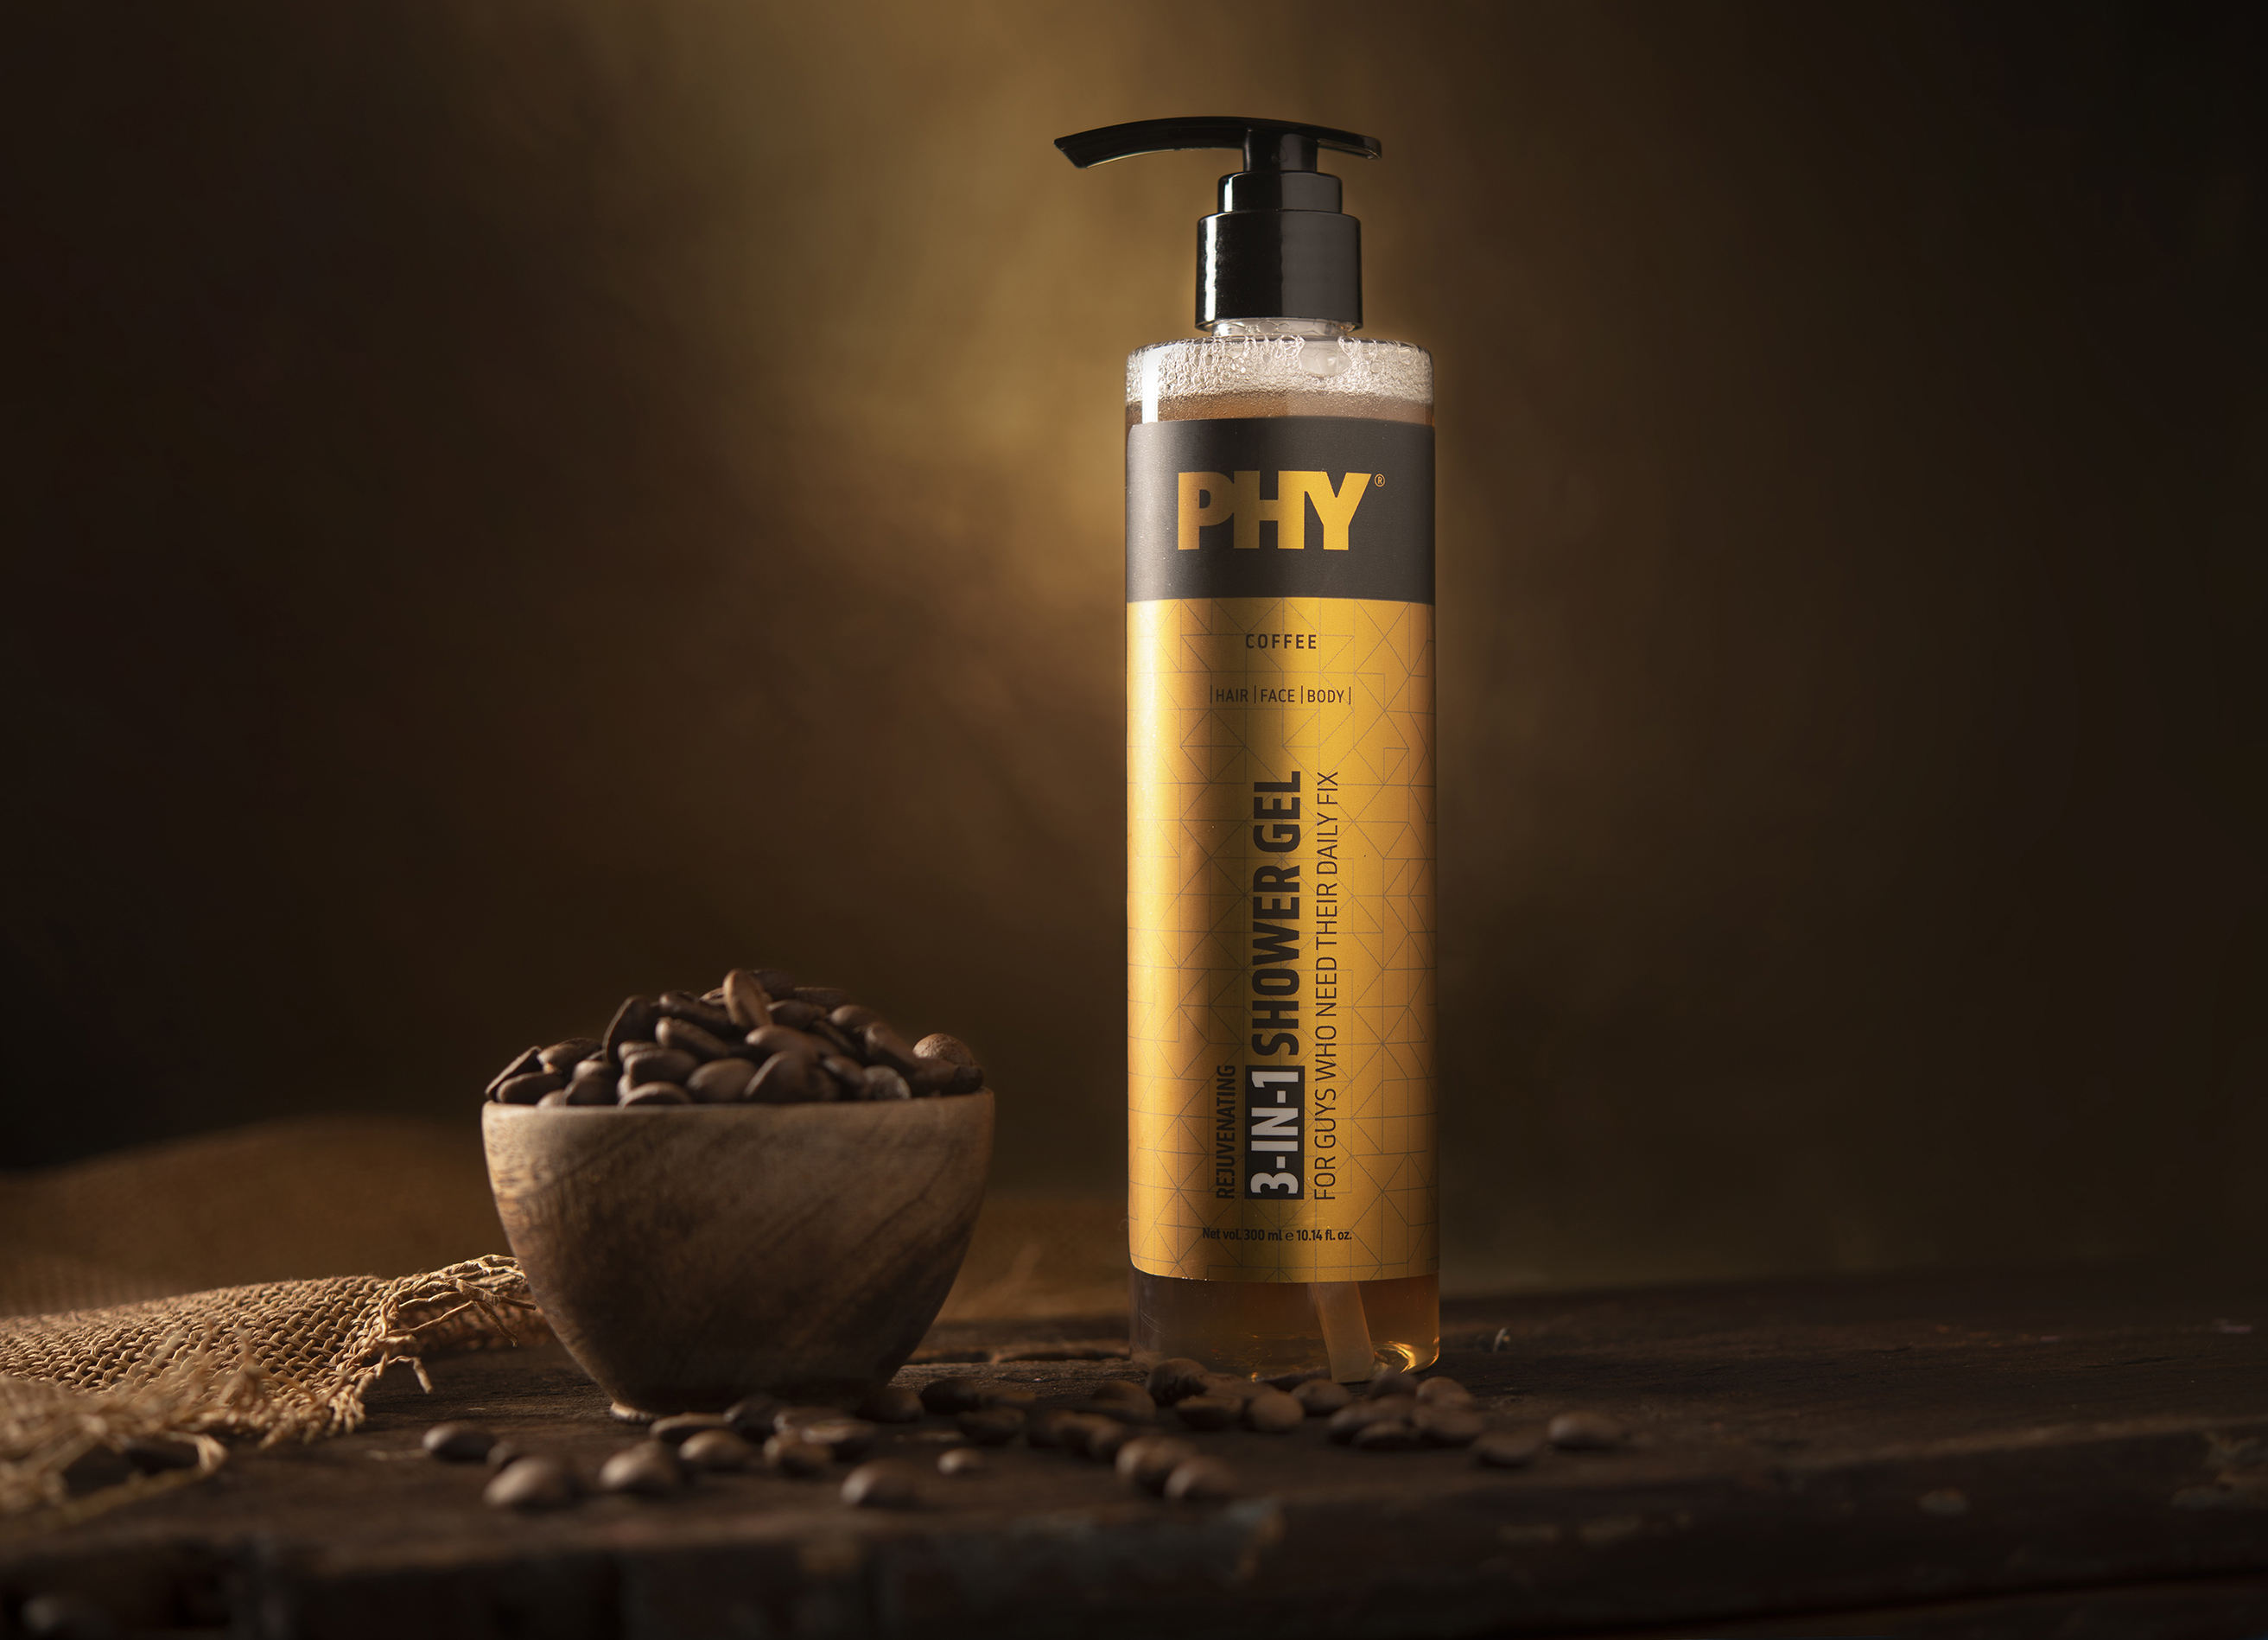 Phy drops its 3-in-1 Rejuvenating Shower Gel